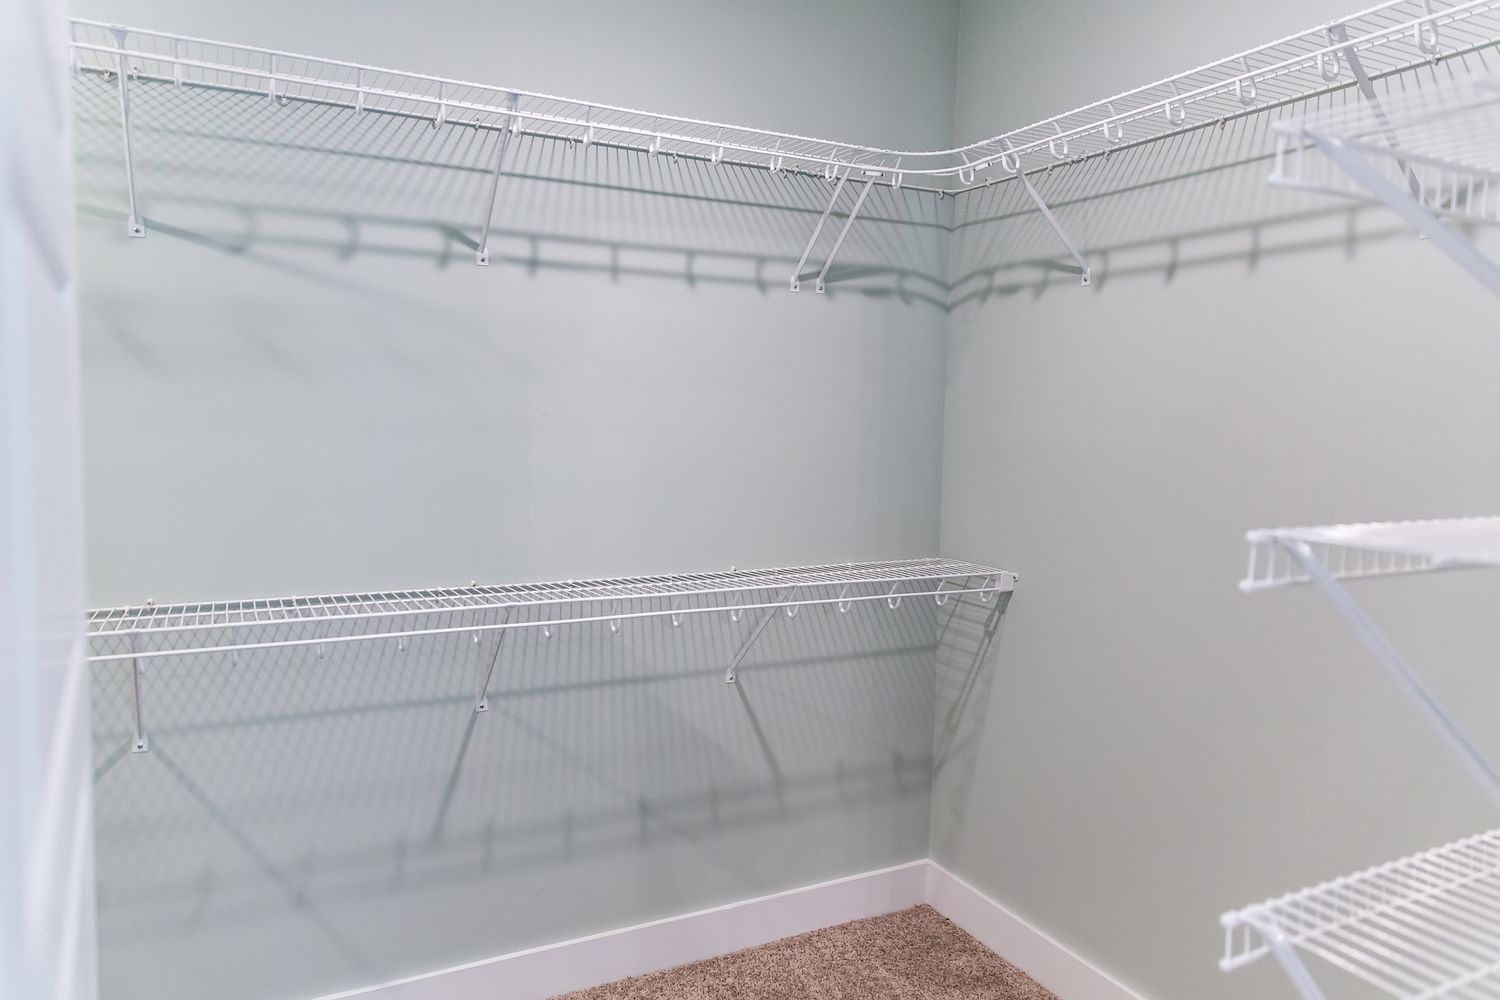 Ventilated wire shelving